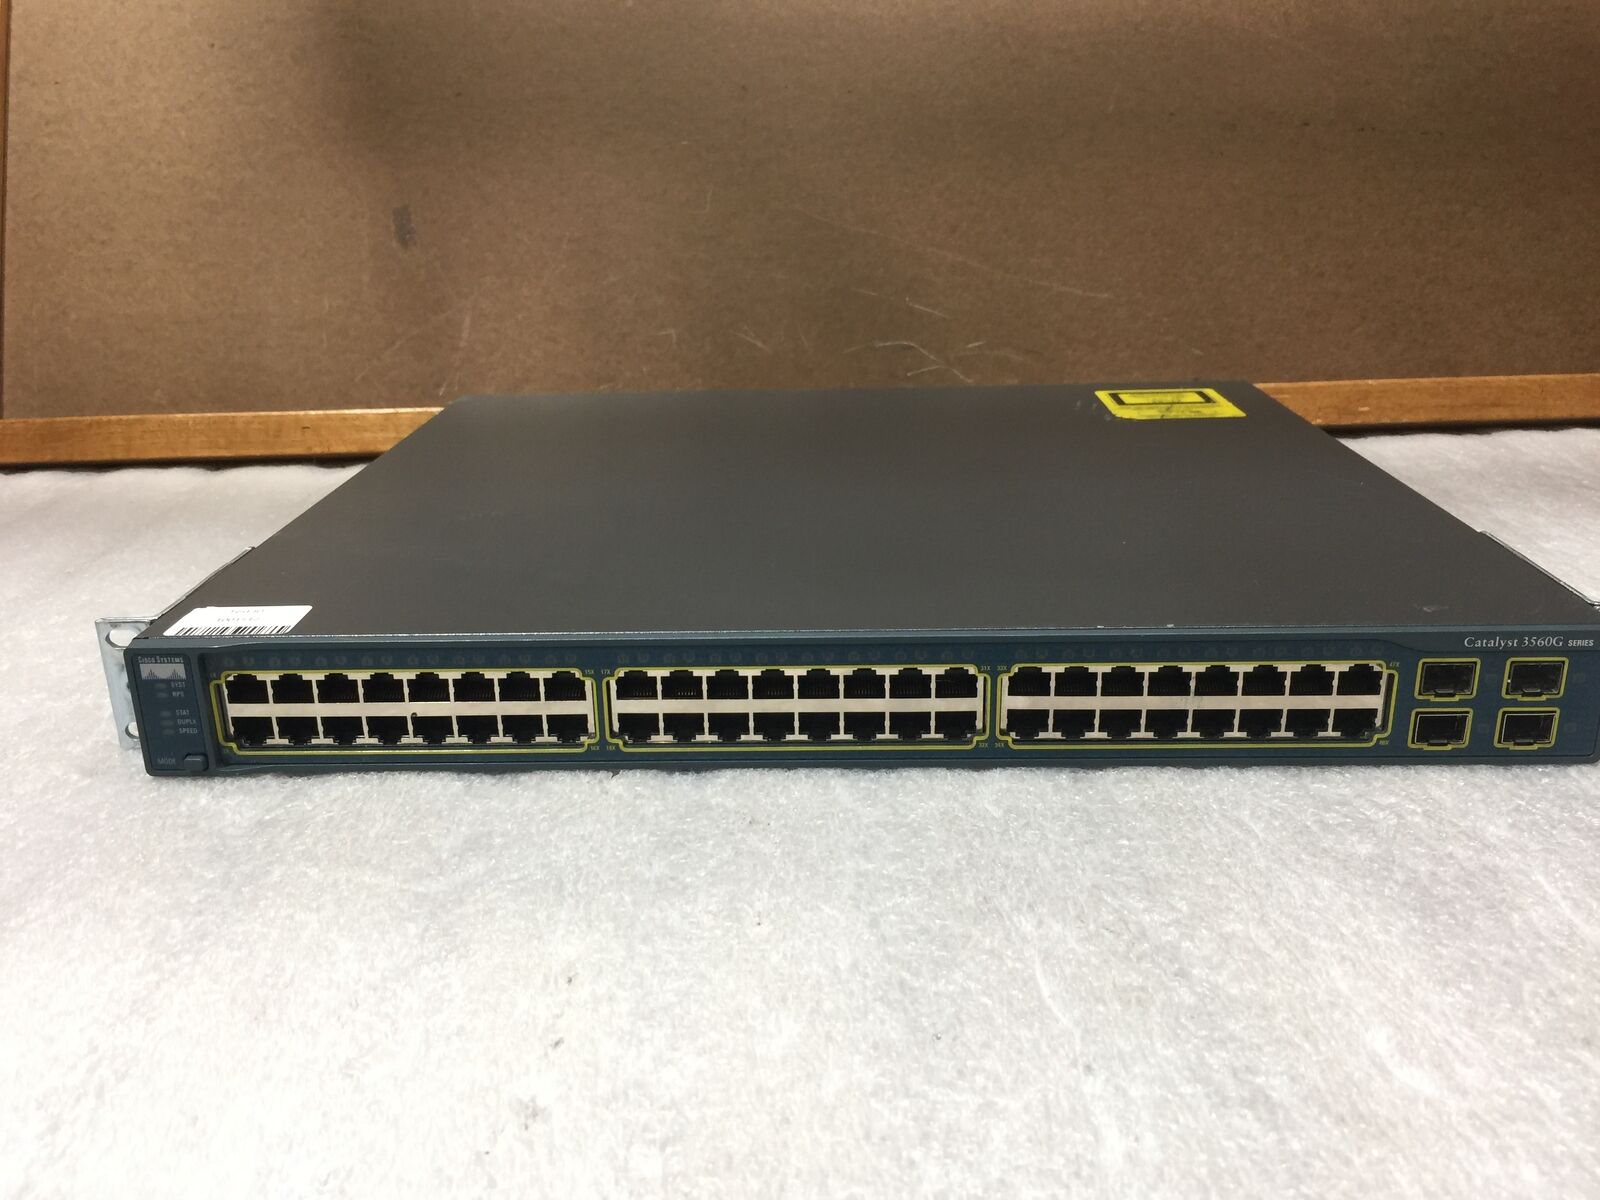 Cisco WS-C3560G-48TS-S Catalyst 48 Port V02 Ethernet Switch, Tested and Working